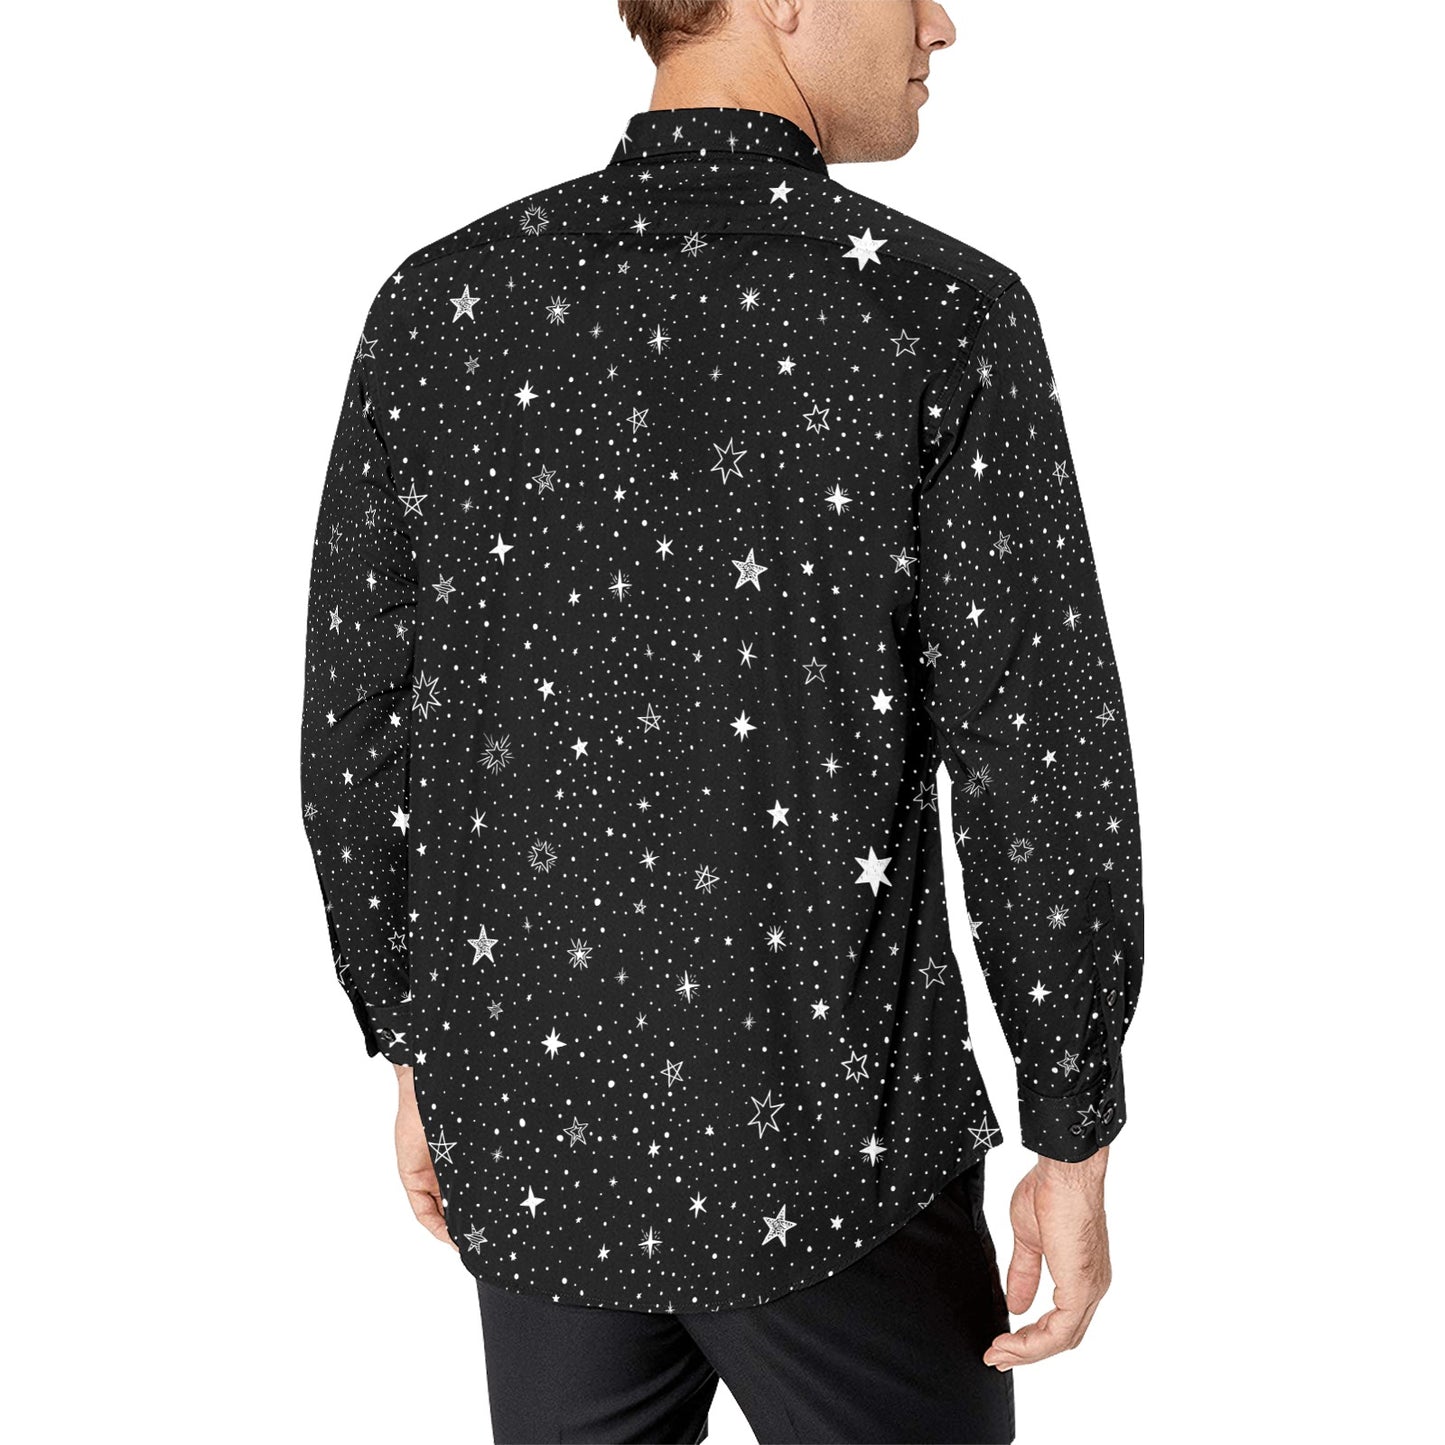 Stars Long Sleeve Men Button Up Shirt, Space Black White Print Dress Buttoned Collar Dress Shirt with Chest Pocket Starcove Fashion